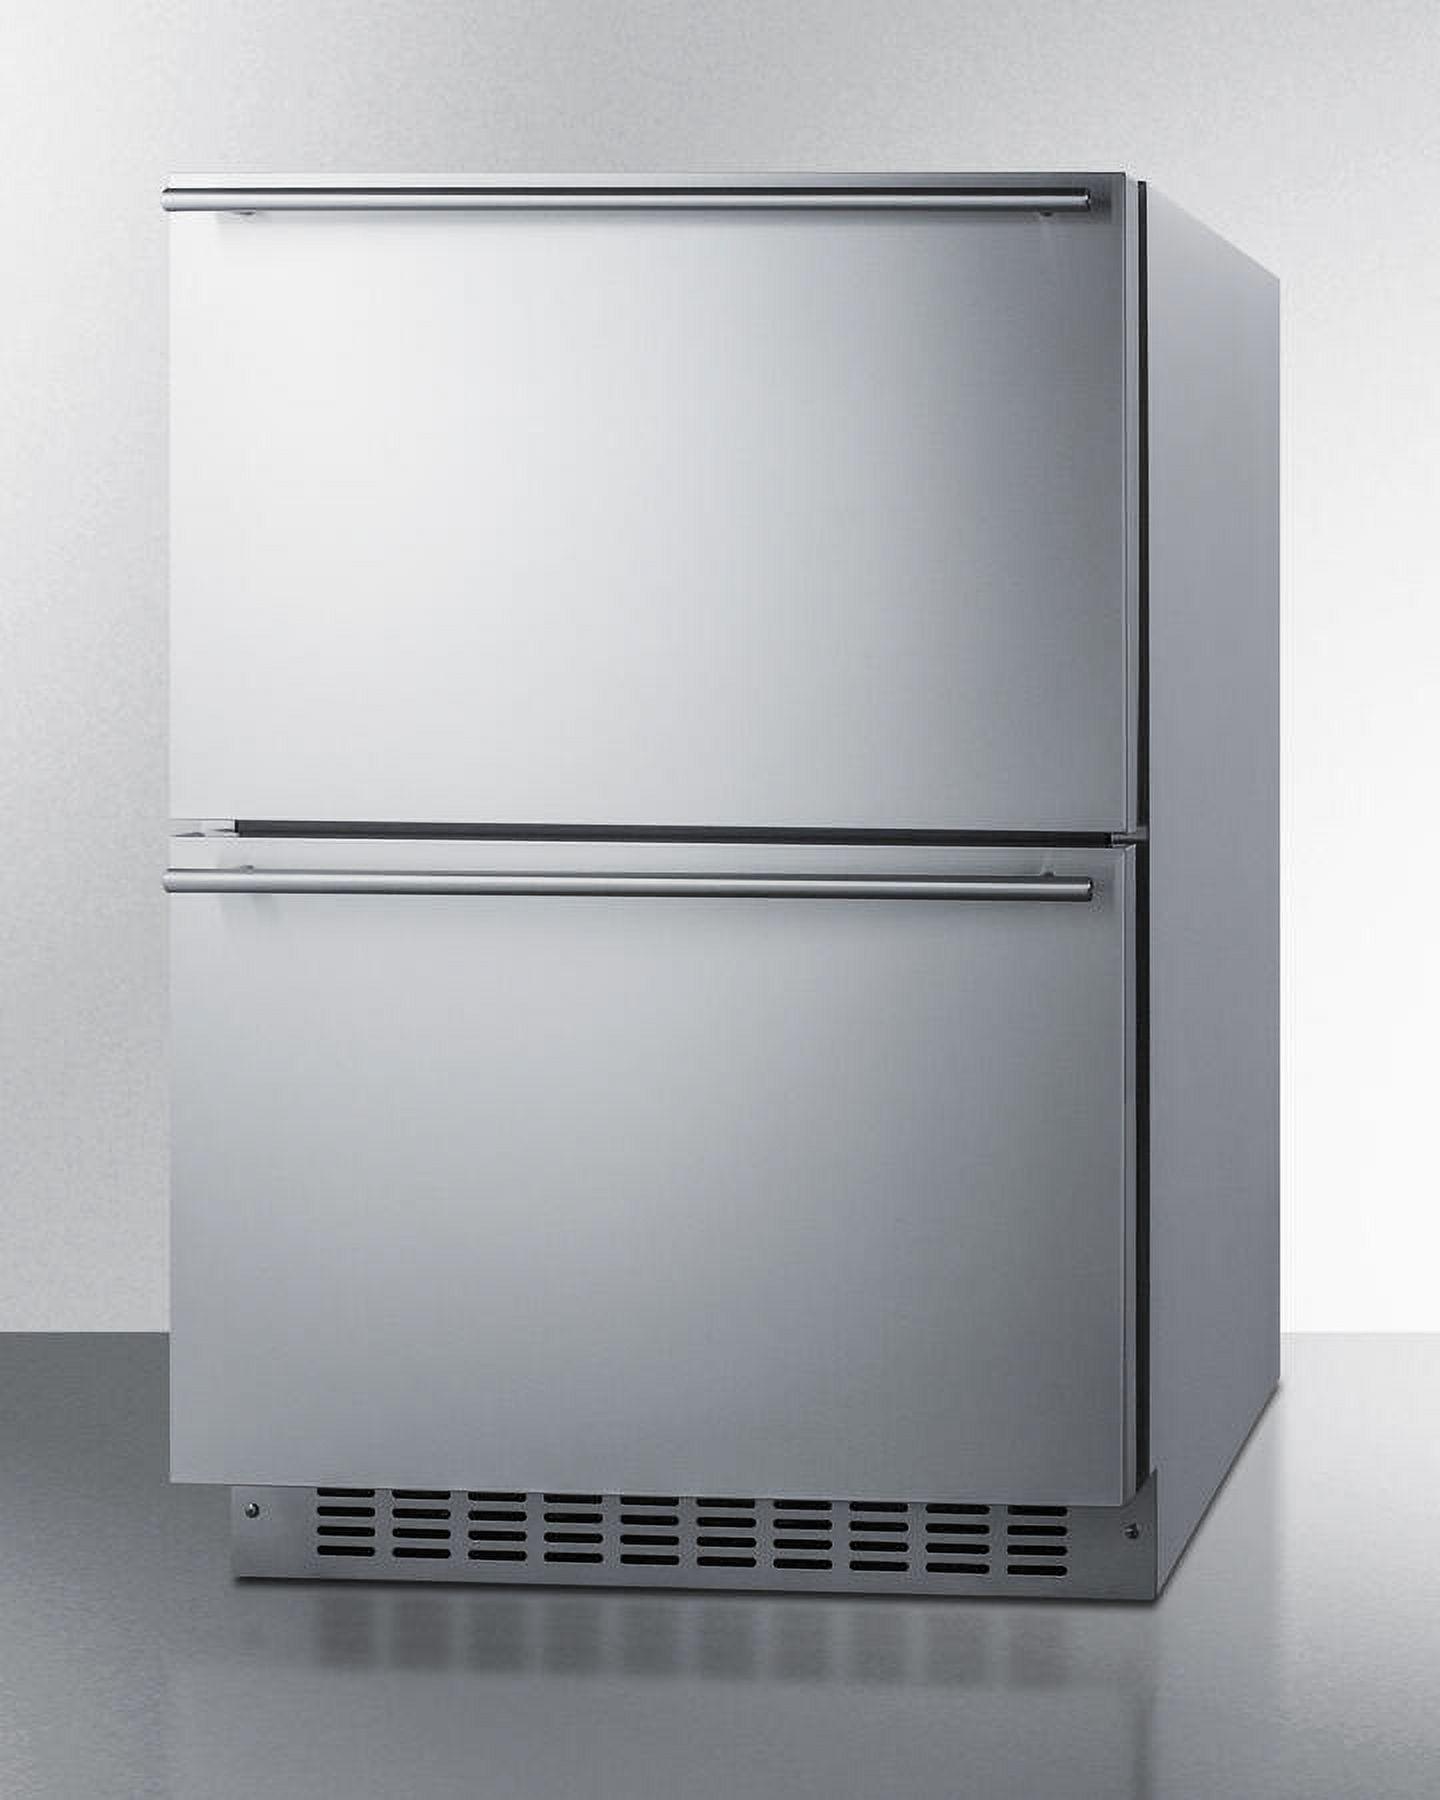 Summit Appliance SPRF34D 24 in. Wide 2-Drawer Refrigerator-Freezer, Stainless Steel - image 3 of 15